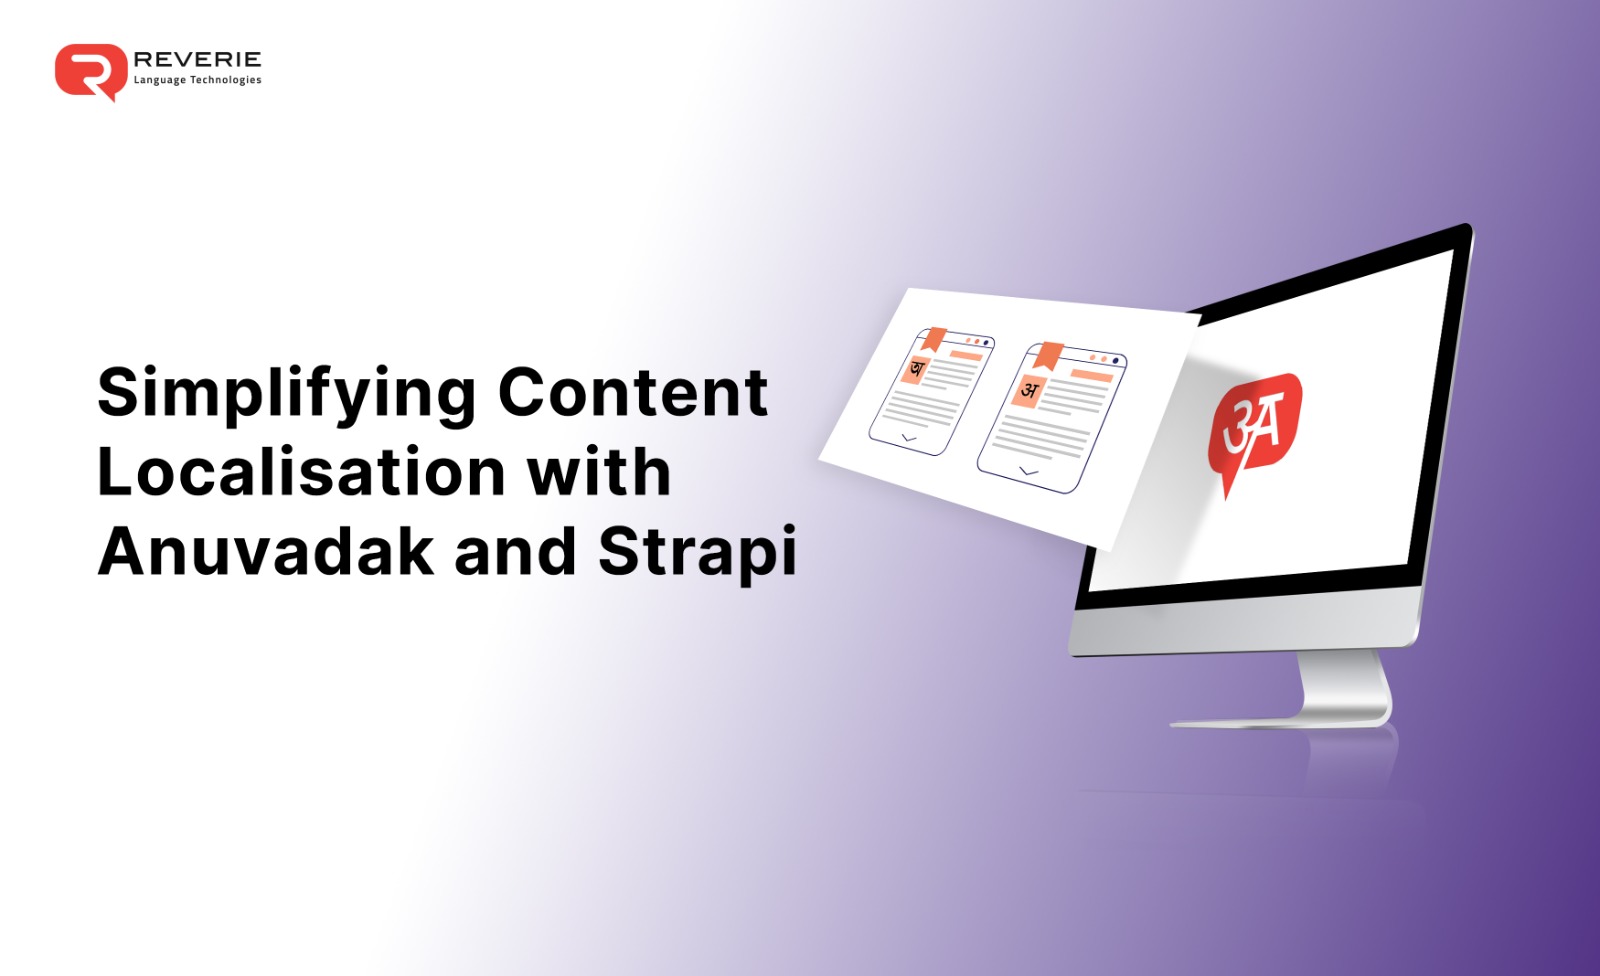 Simplifying Content Localization with Anuvadak and Strapi